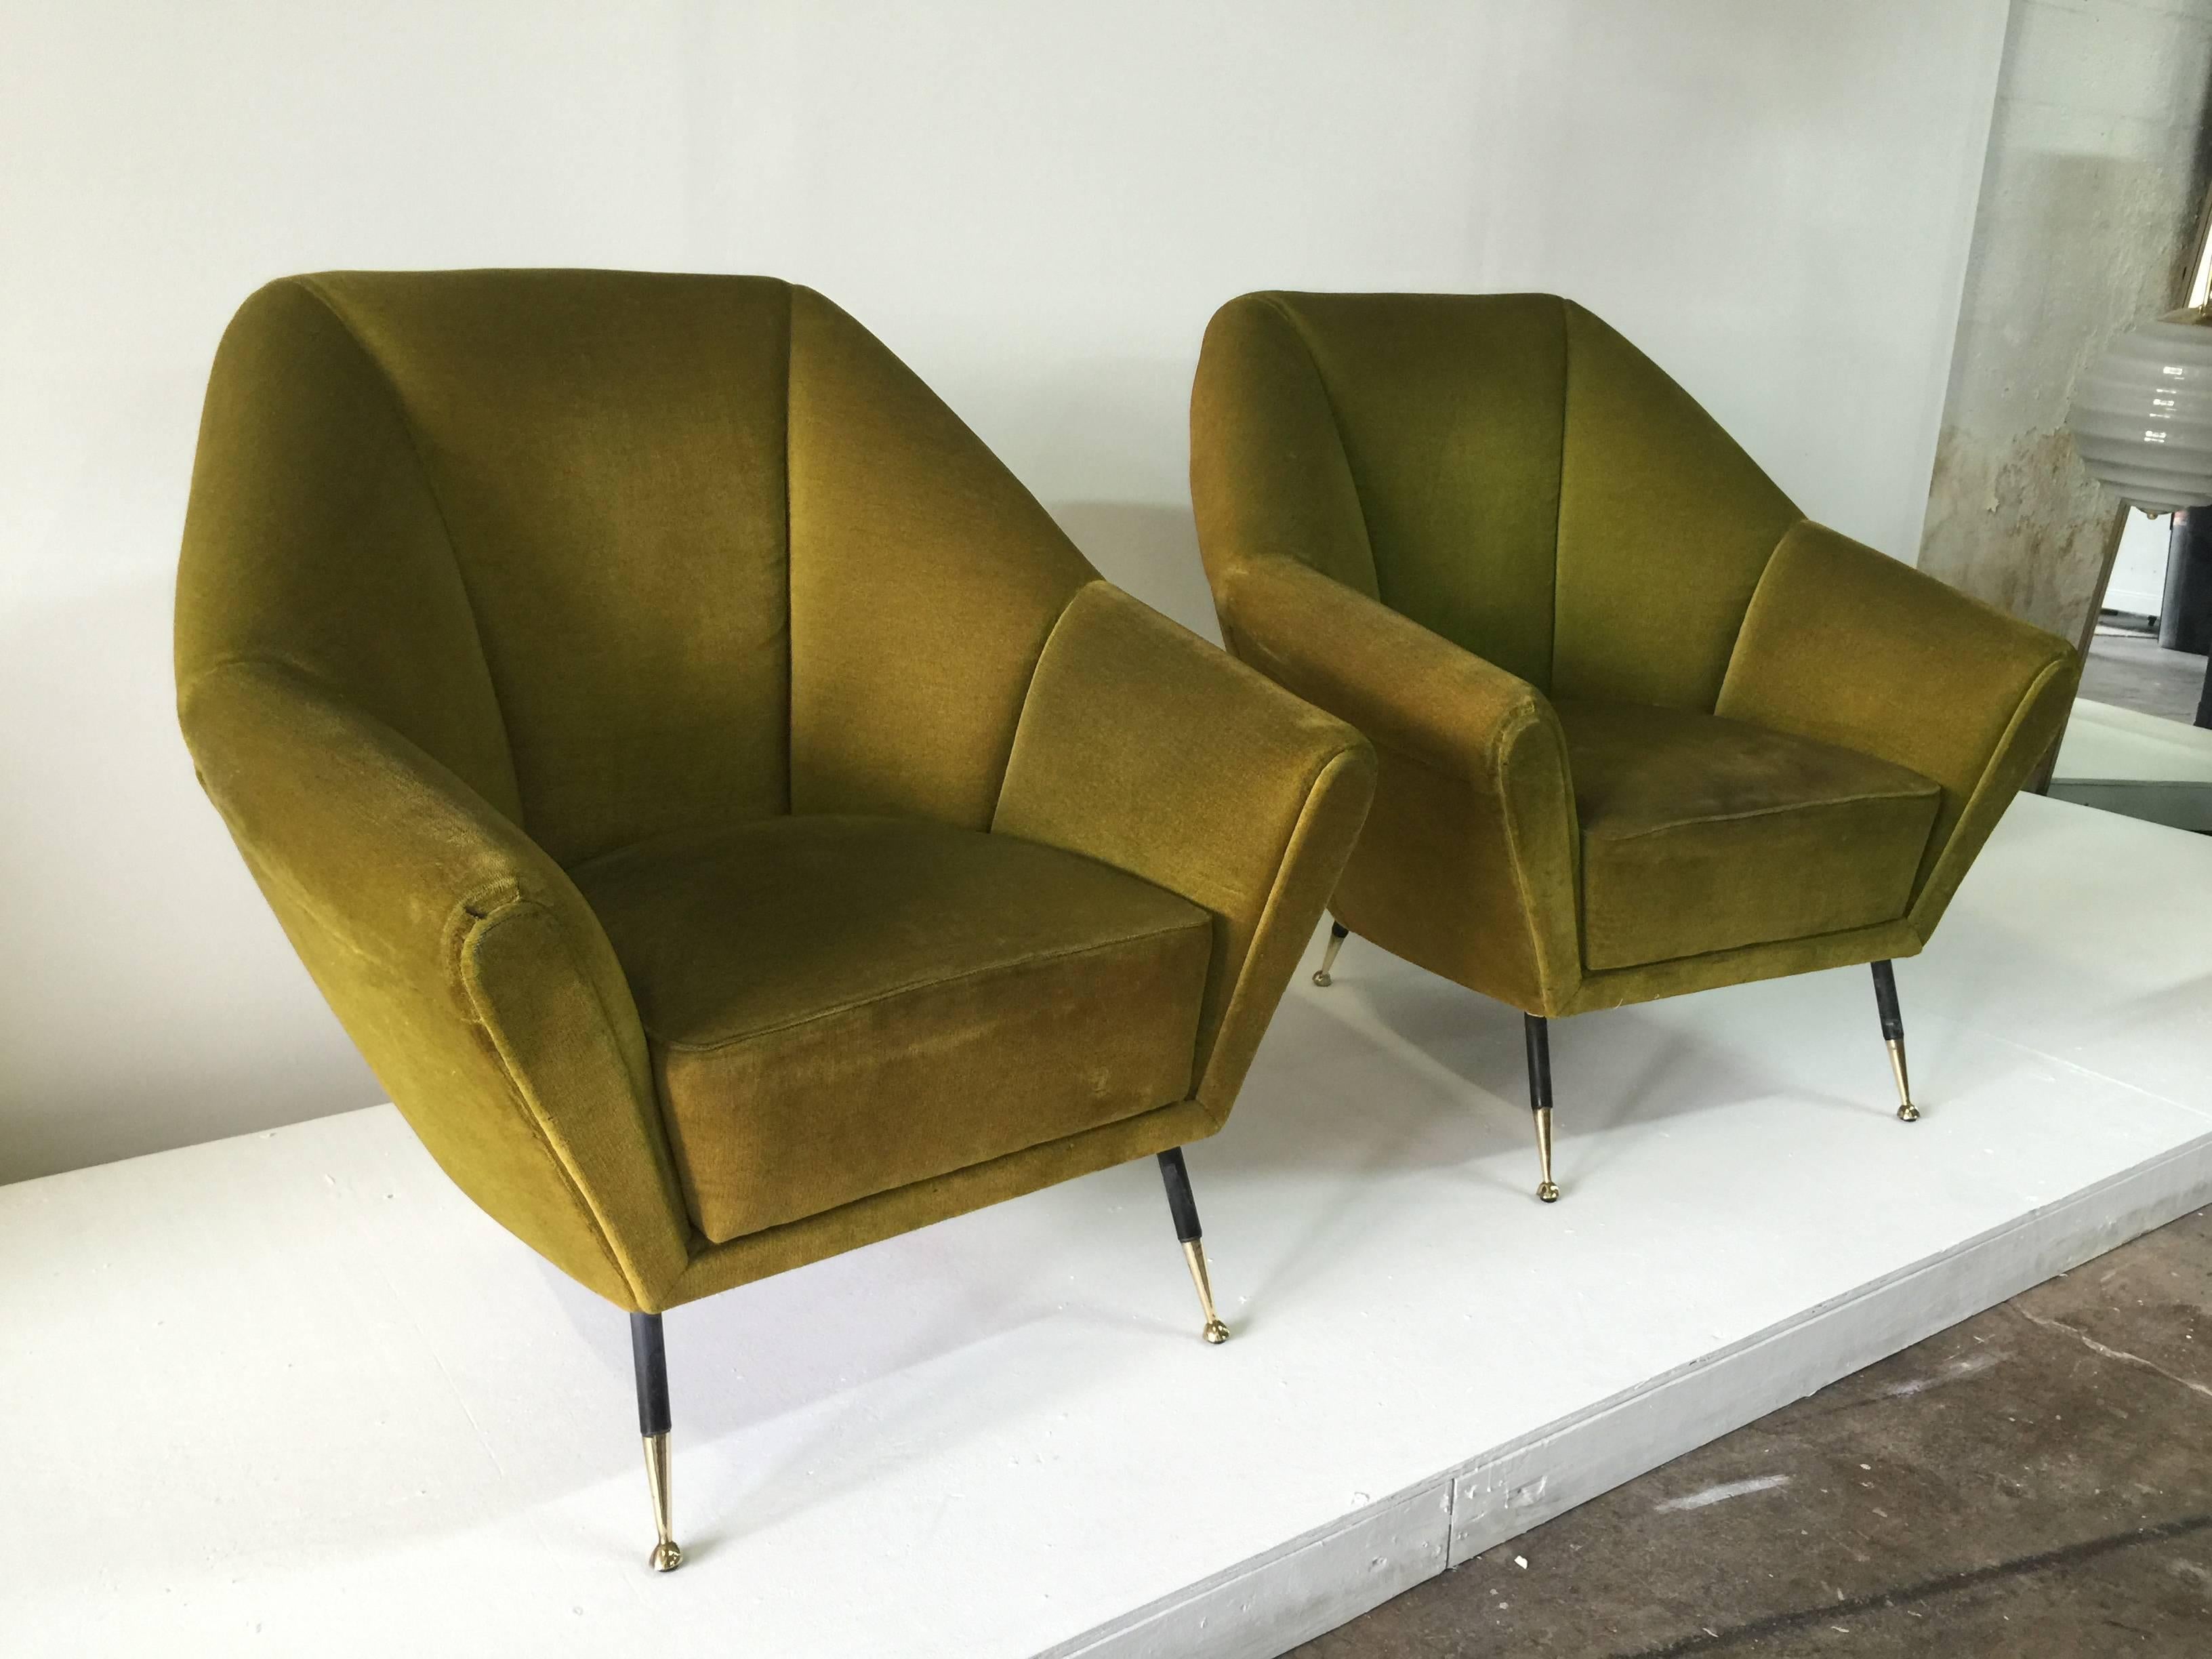 All vintage, original green velvet in very nice "ready to use" condition.

Geometric design and brass tipped legs.